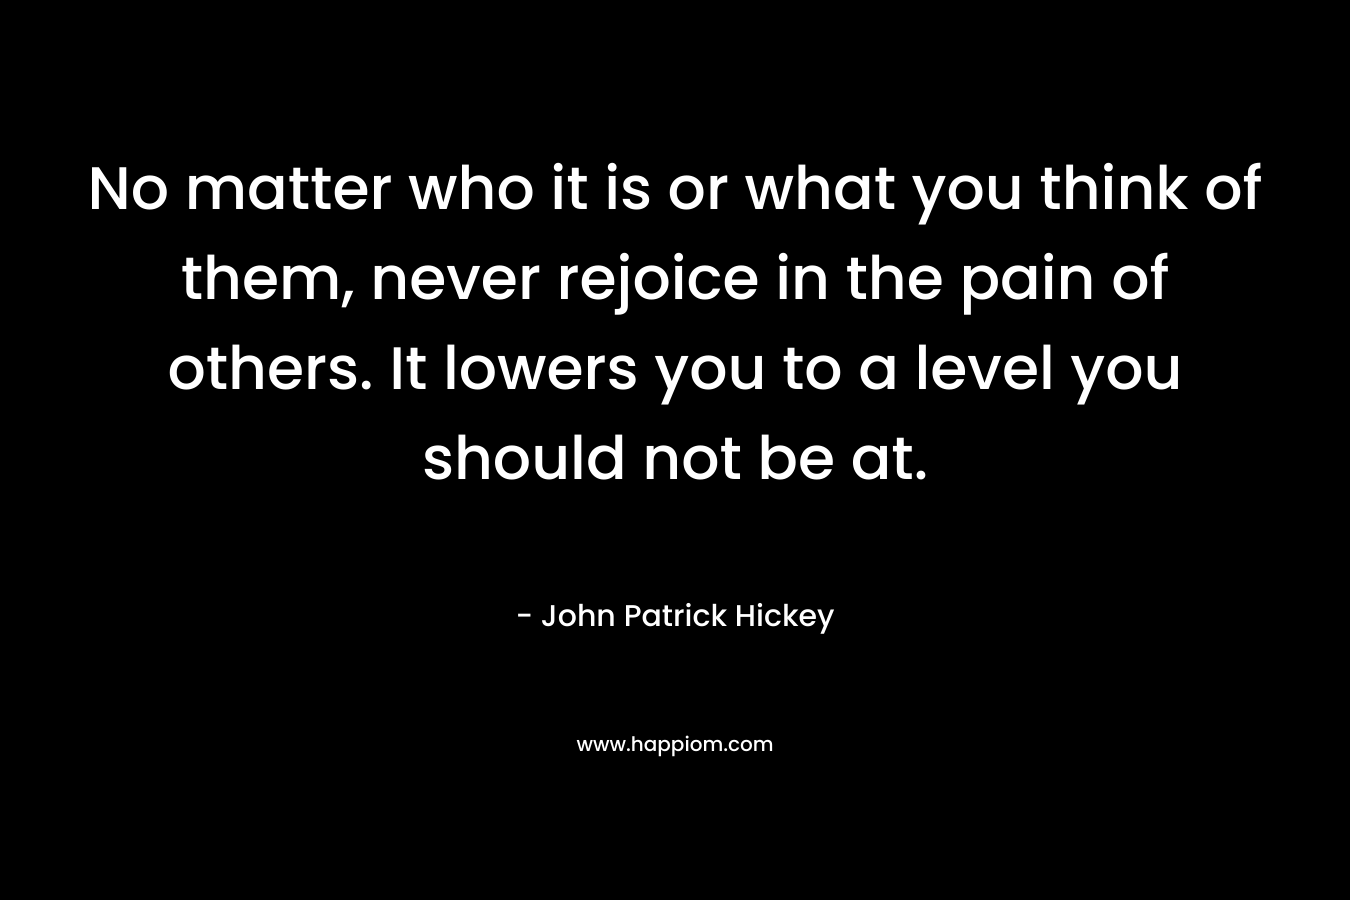 No matter who it is or what you think of them, never rejoice in the pain of others. It lowers you to a level you should not be at. – John Patrick Hickey